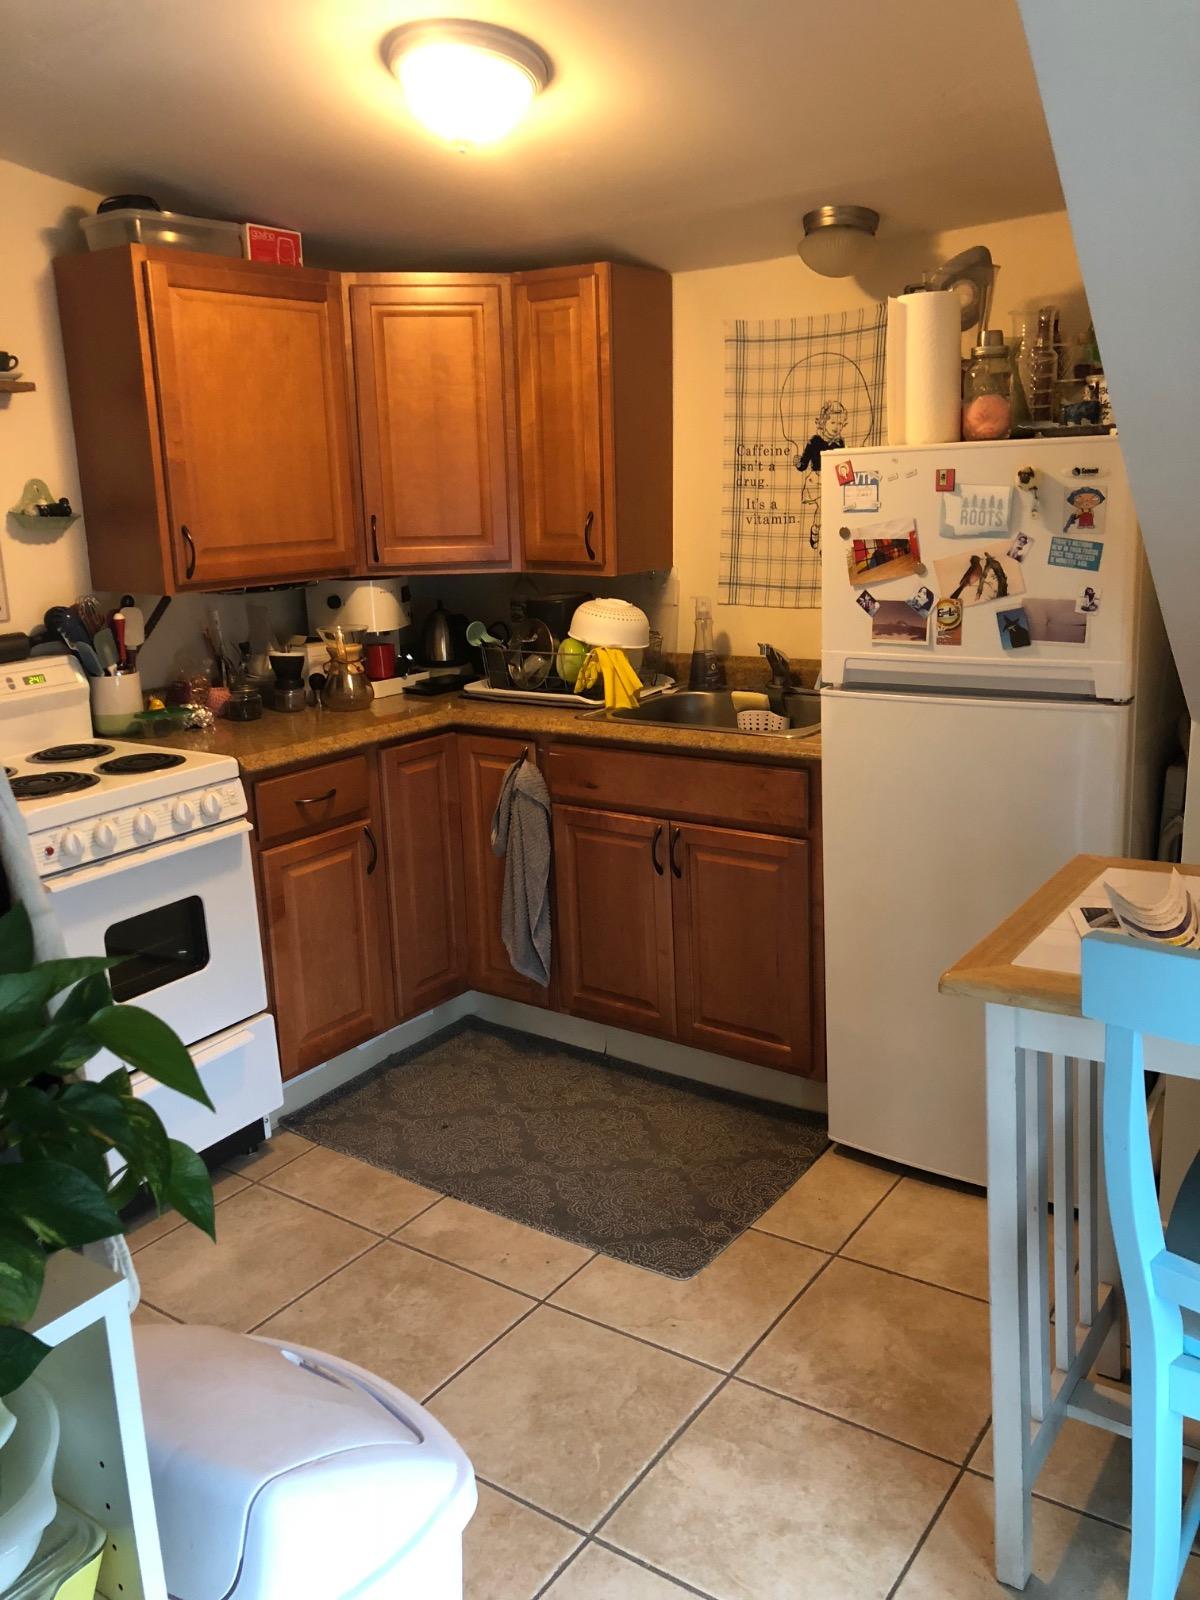 Photos of apartment on Central,Somerville MA 02143